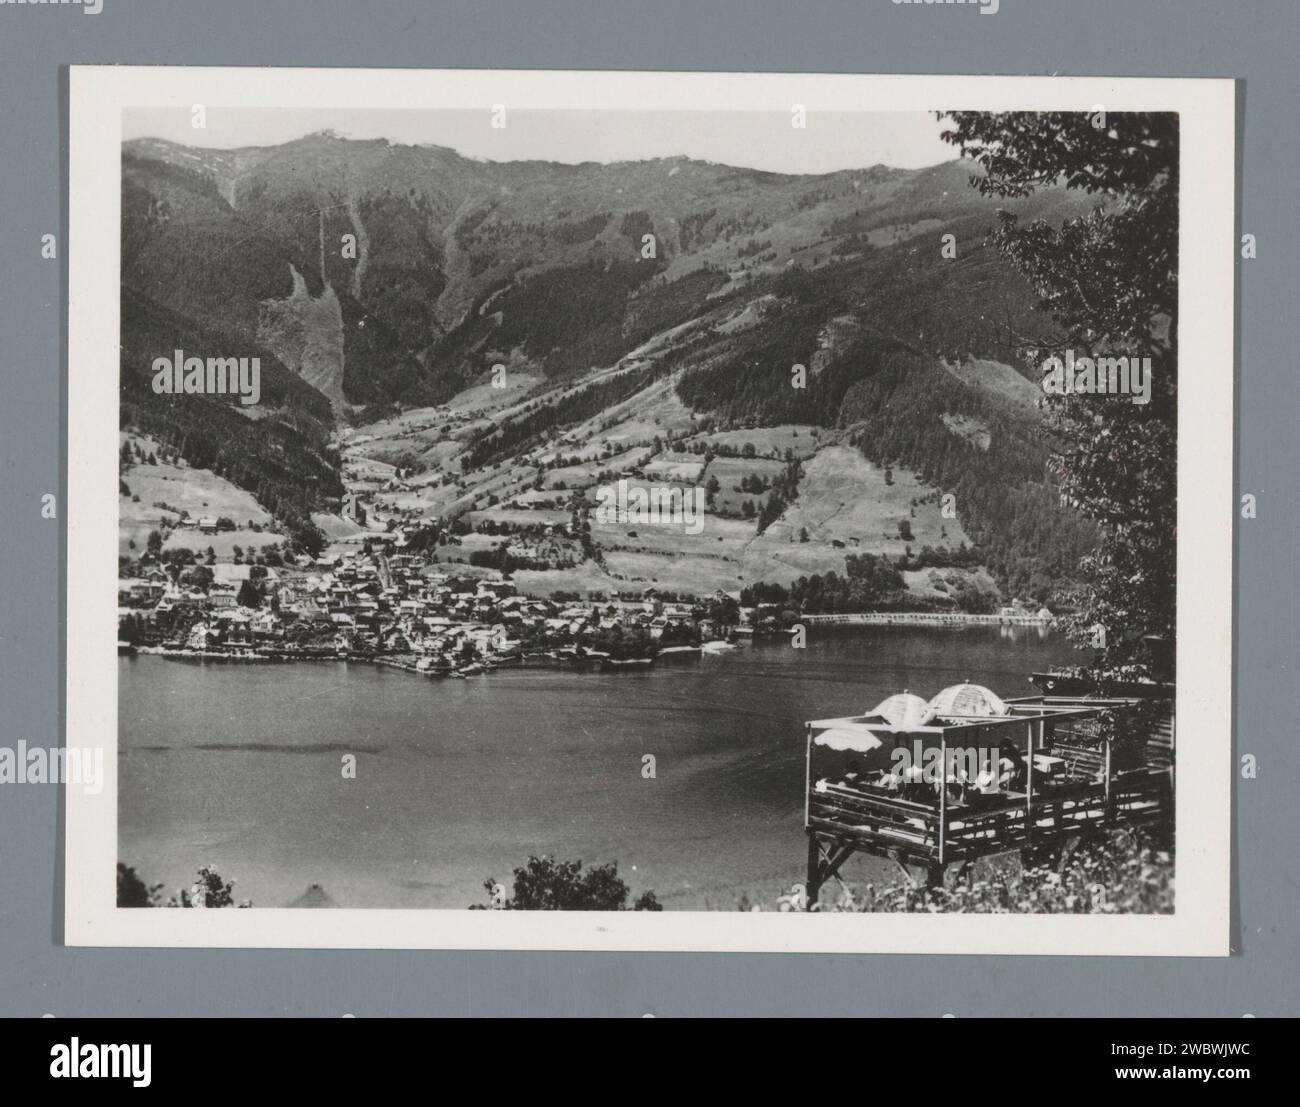 View of Zell am See, the Zeller See and the Schmittenhöhe, Anonymous, C.J.S., c. 1950 - c. 1960 photograph  Zell am Seepublisher: Salzburg photographic support gelatin silver print city-view, and landscape with man-made constructions. mountains. lake Zell am See Stock Photo